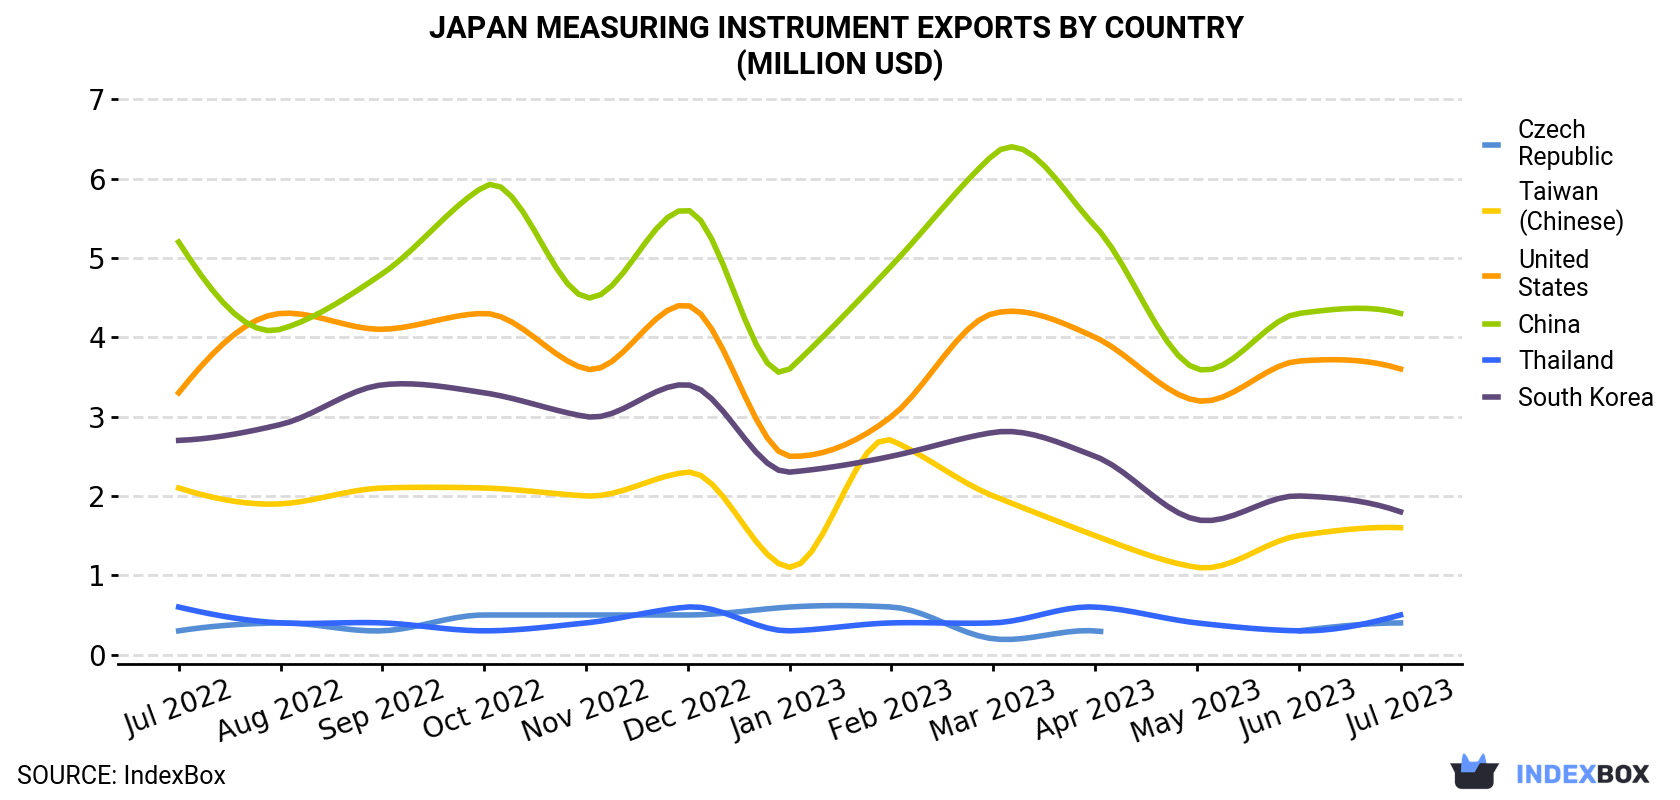 Japan Measuring Instrument Exports By Country (Million USD)